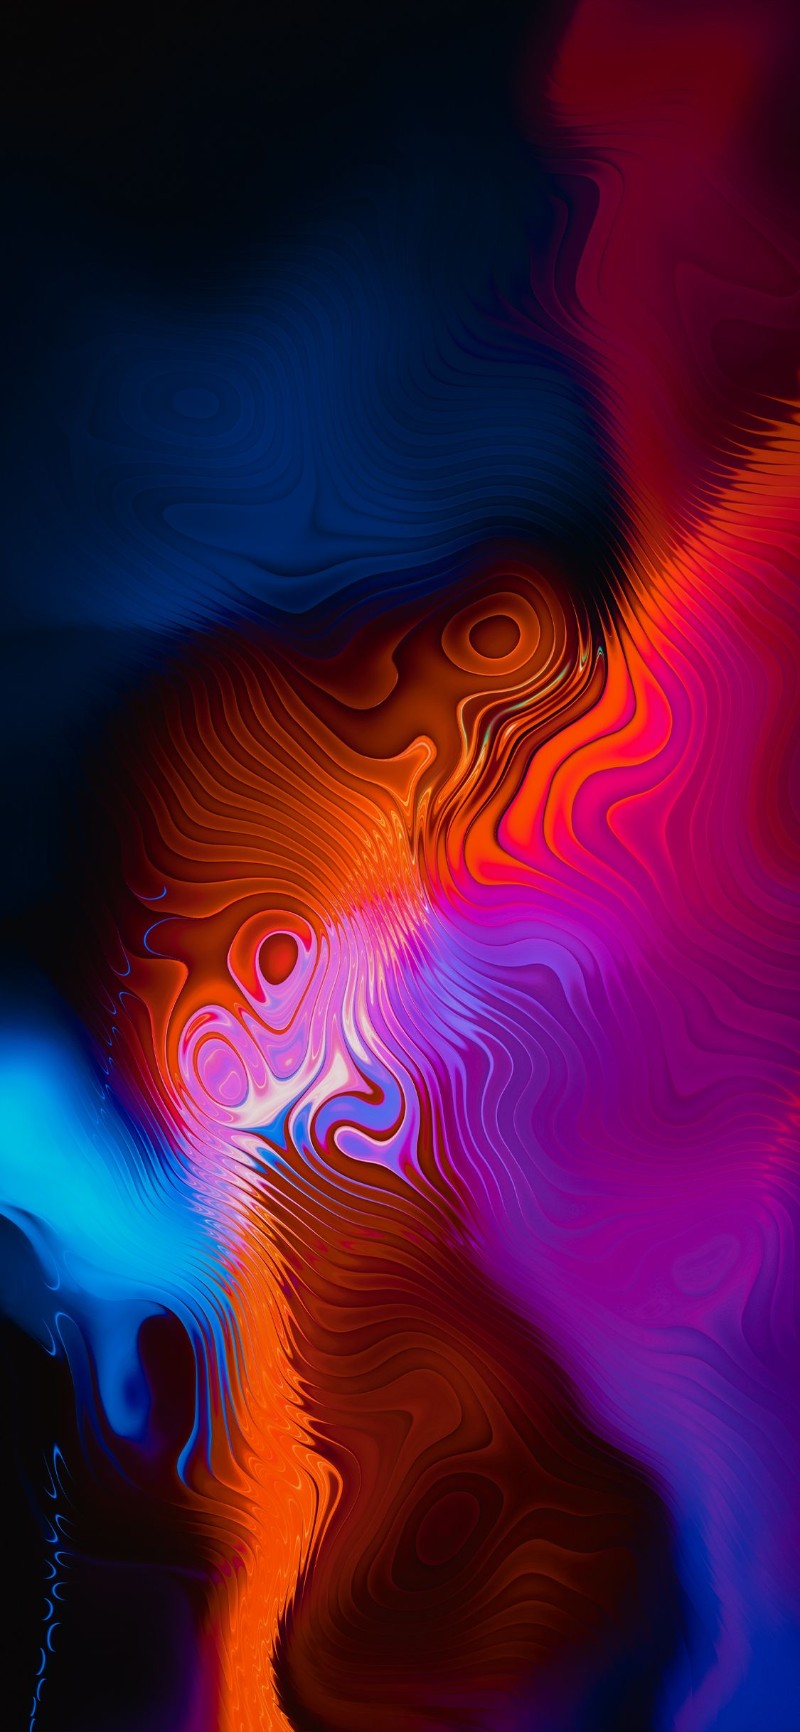 Best Aesthetic Wallpaper Picture for iOS 14: Black, White, Gold, Neon, Red, Blue, Pink, Orange, Green, Purple, and More